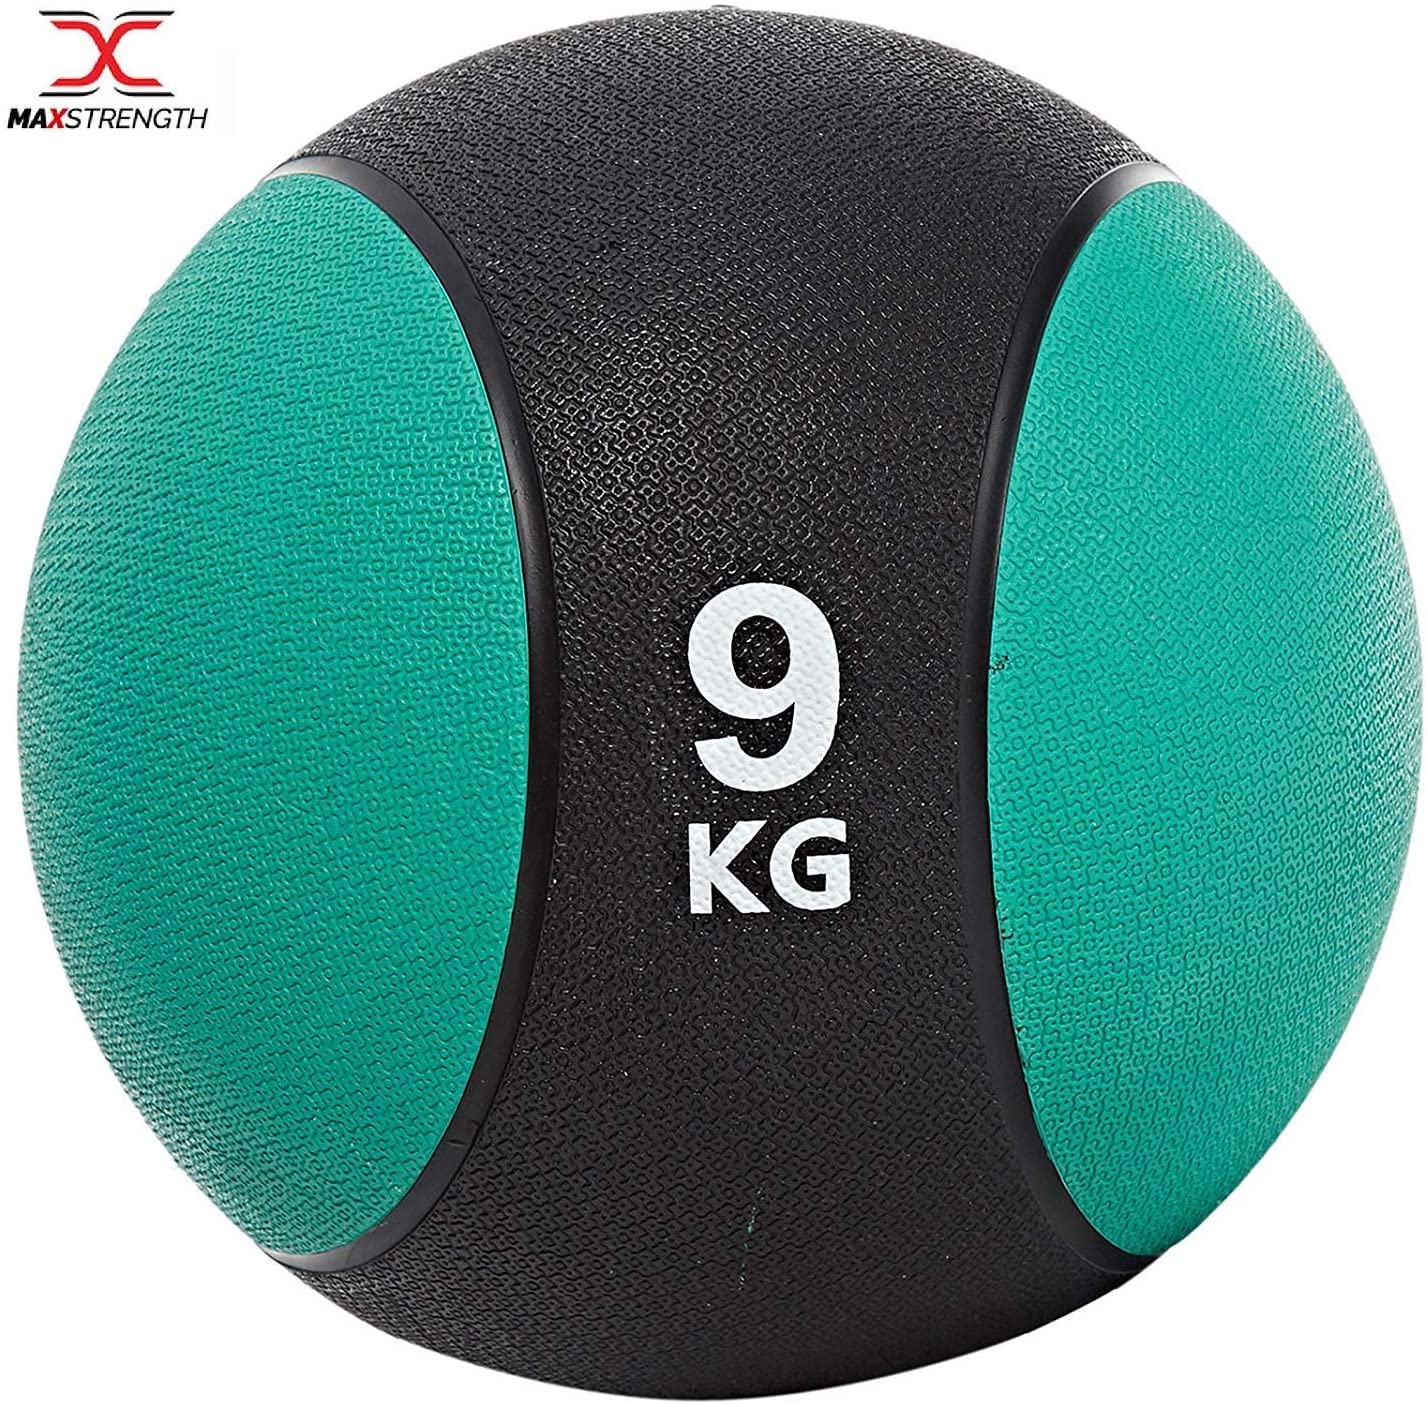 Max Strength Medicine Ball Rubber Med Bounce Ball Strength Training Home Gym Fitness Exercise Weight Lifting Fat Loss -Multi Color